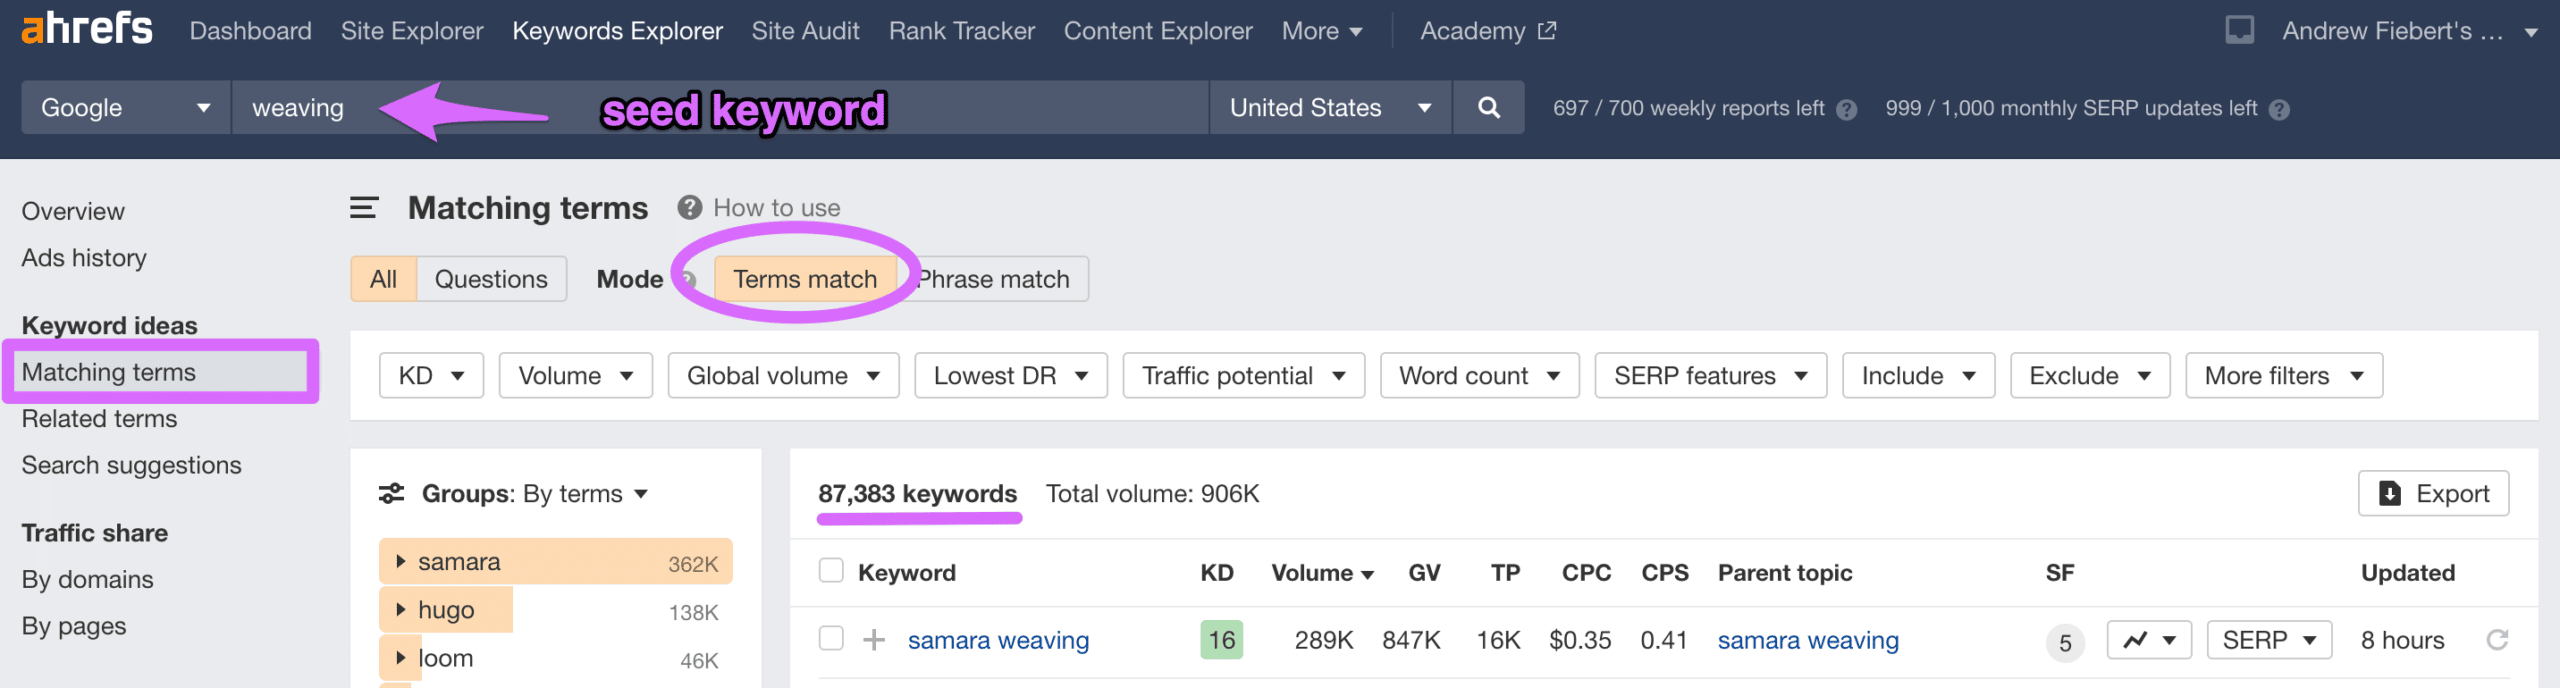 example showing ahrefs seed keyword for finding ideas on how to start a lifestyle blog content ideas